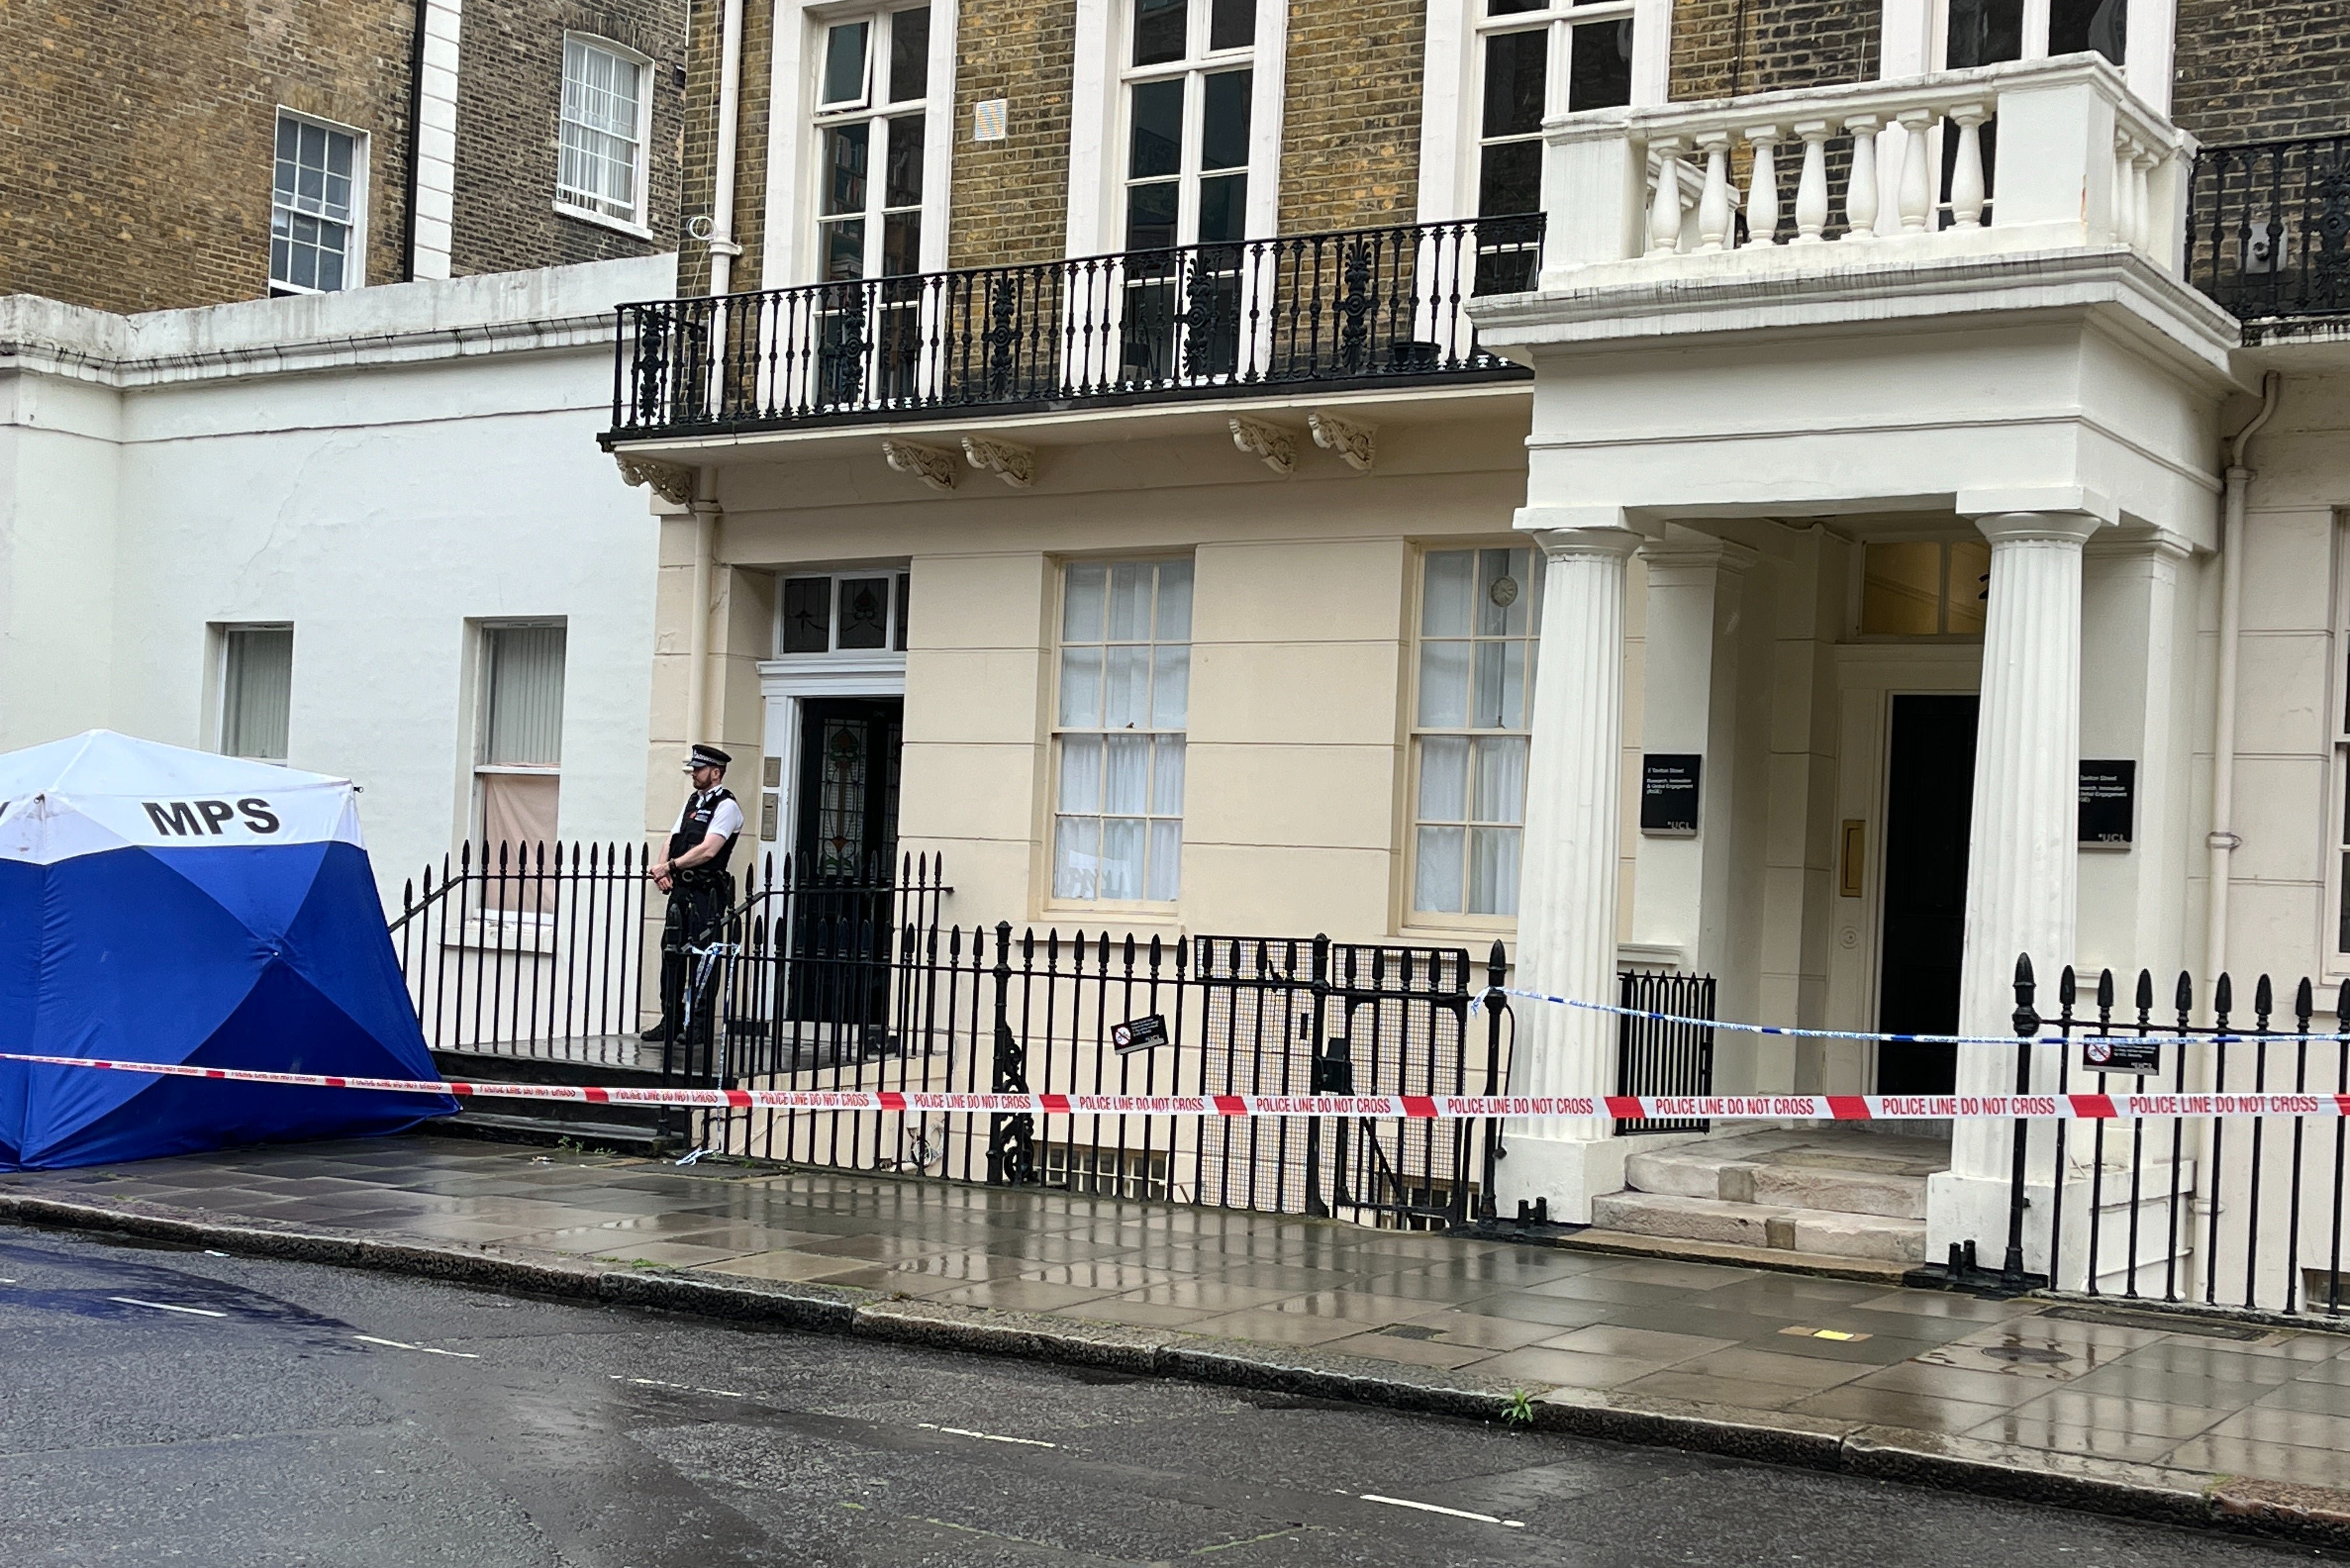 Detectives searched a flat in Taviton Street, Bloomsbury, and found the body of the newborn baby